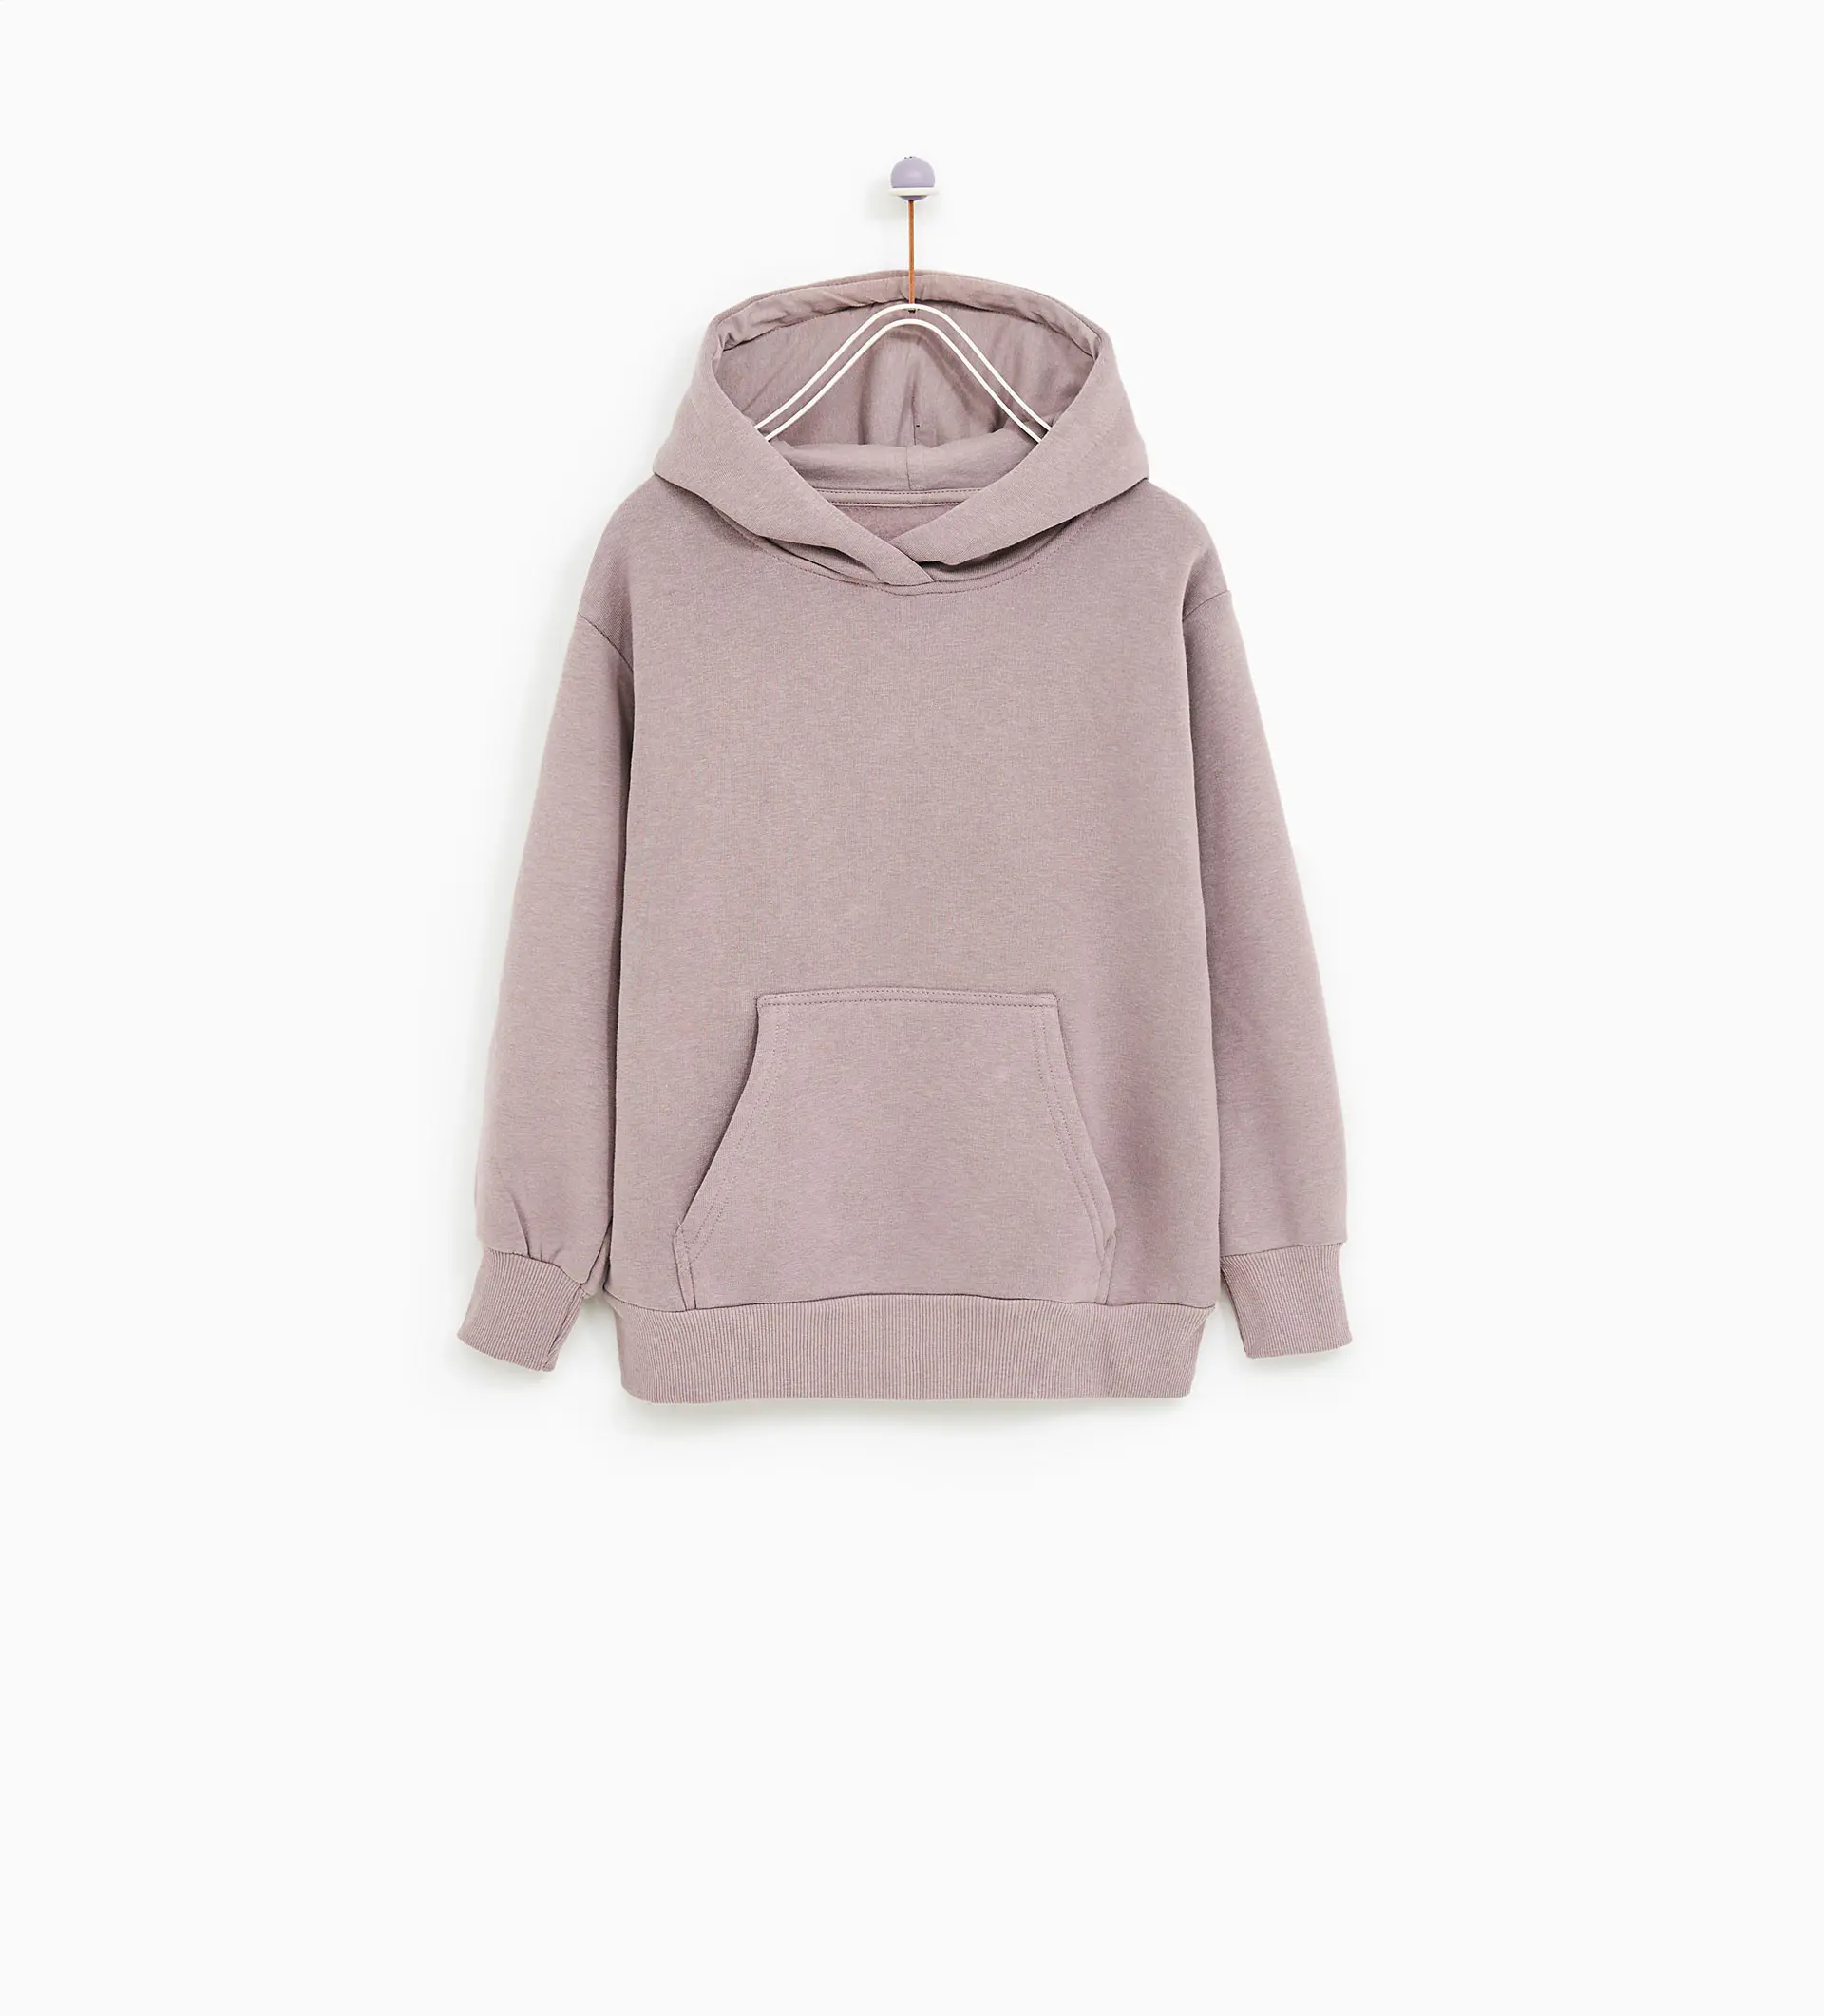 Hoodie with long cuffed sleeves and front pouch pocket. Zara